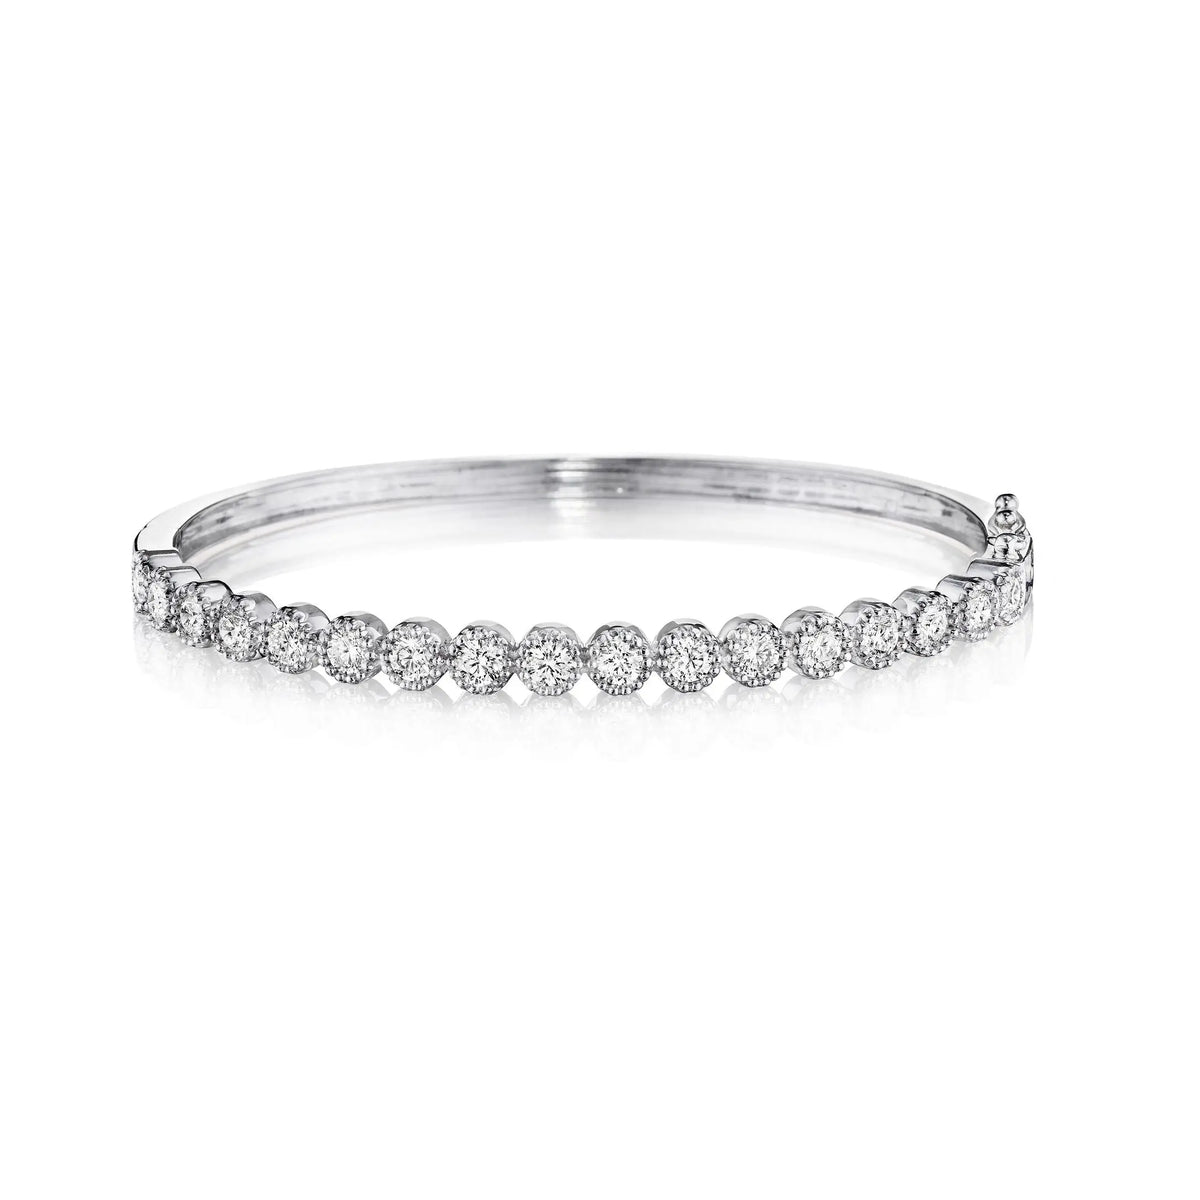 This a classic bangle that needs to be in your collection. It is 18k white gold with 1.80 cttw of round bezel brilliant cut diamond bangle.   Designed by Penny Preville and made in New York